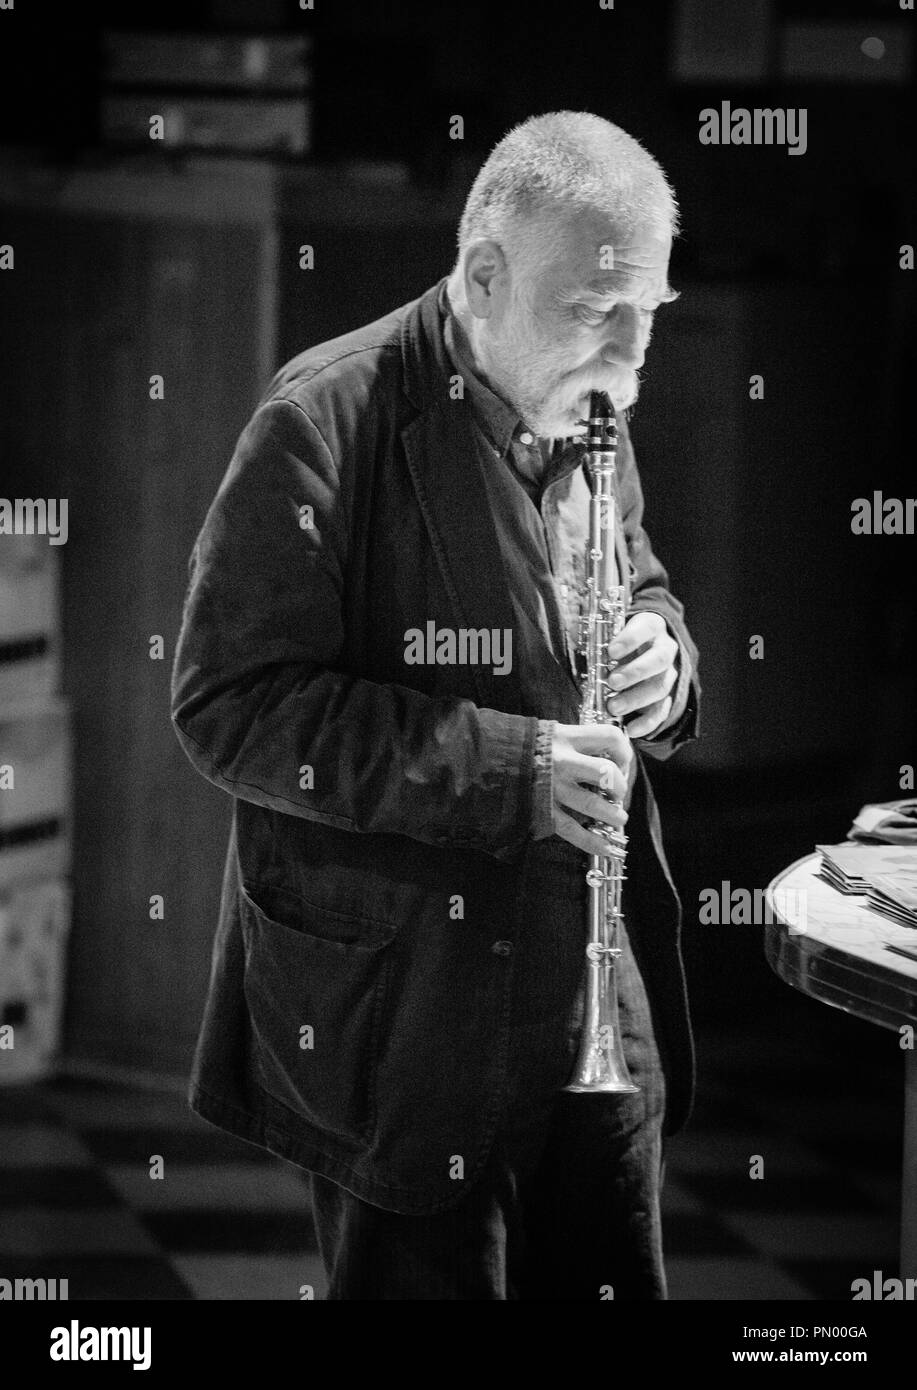 Jazz musician Peter Brötzmann playing clarient in Chicago, in 2013. Stock Photo